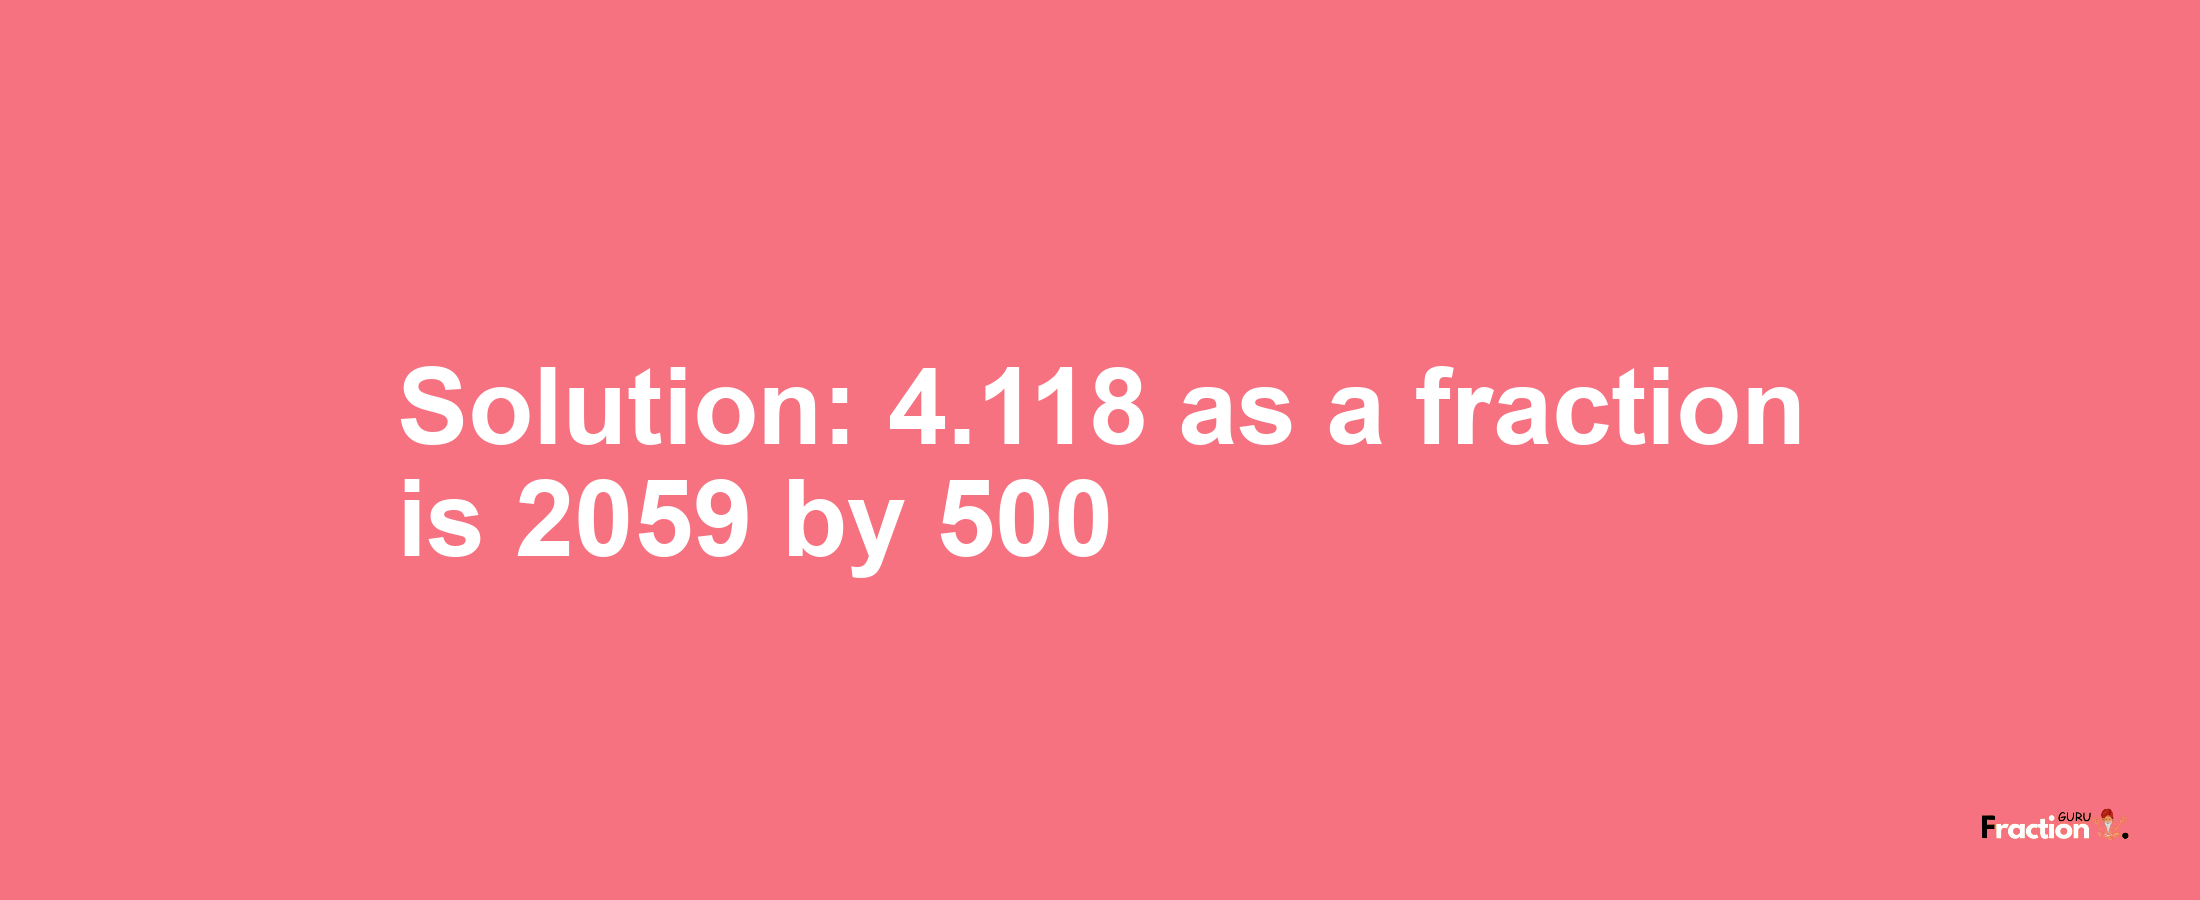 Solution:4.118 as a fraction is 2059/500